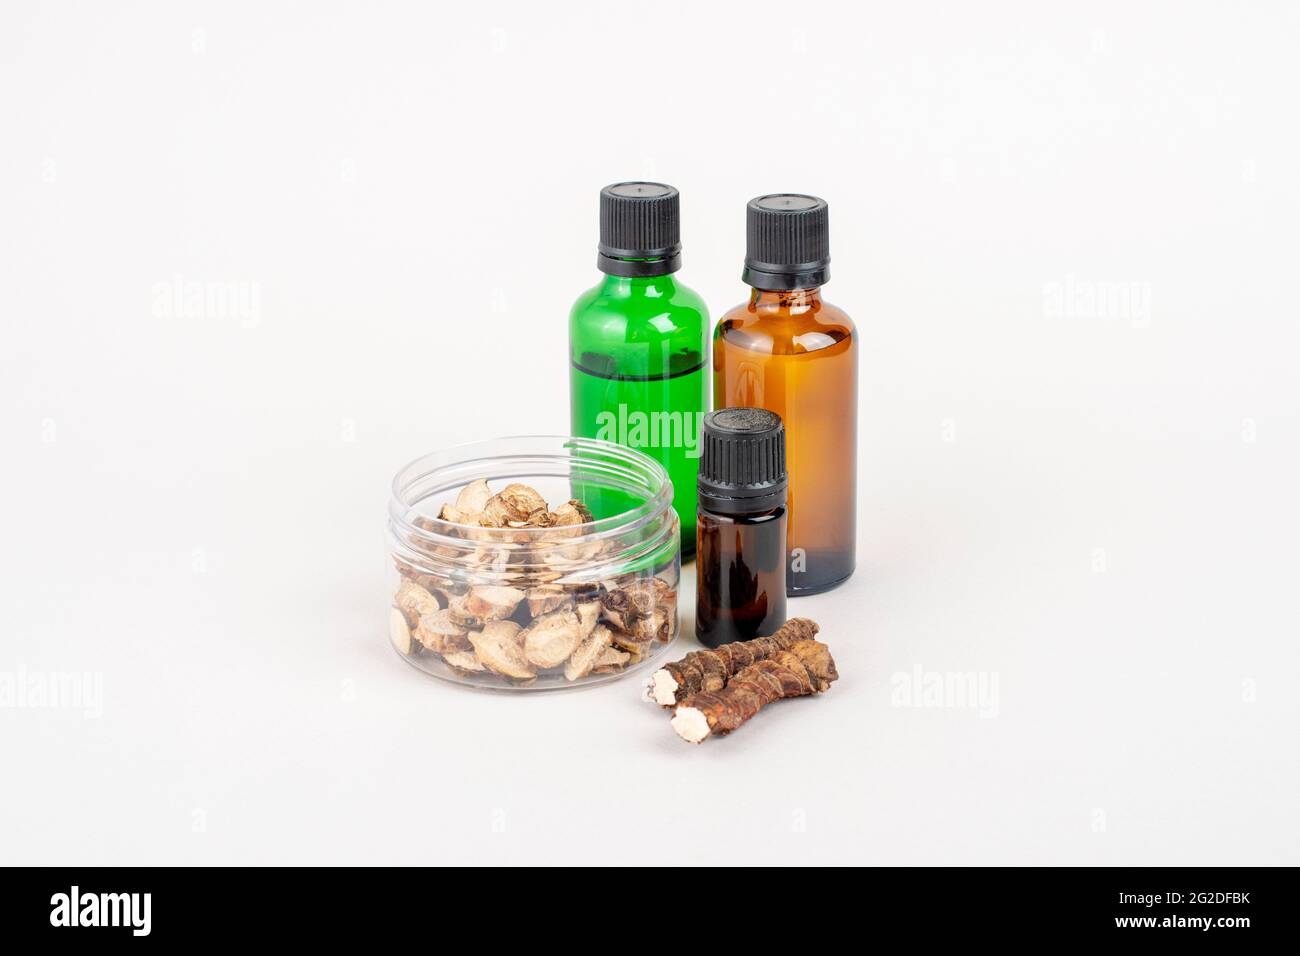 Dried Acorus calamus roots, also known as sweet flag, and bottles with oil and extract isolated on light background. For personal care products, beaut Stock Photo